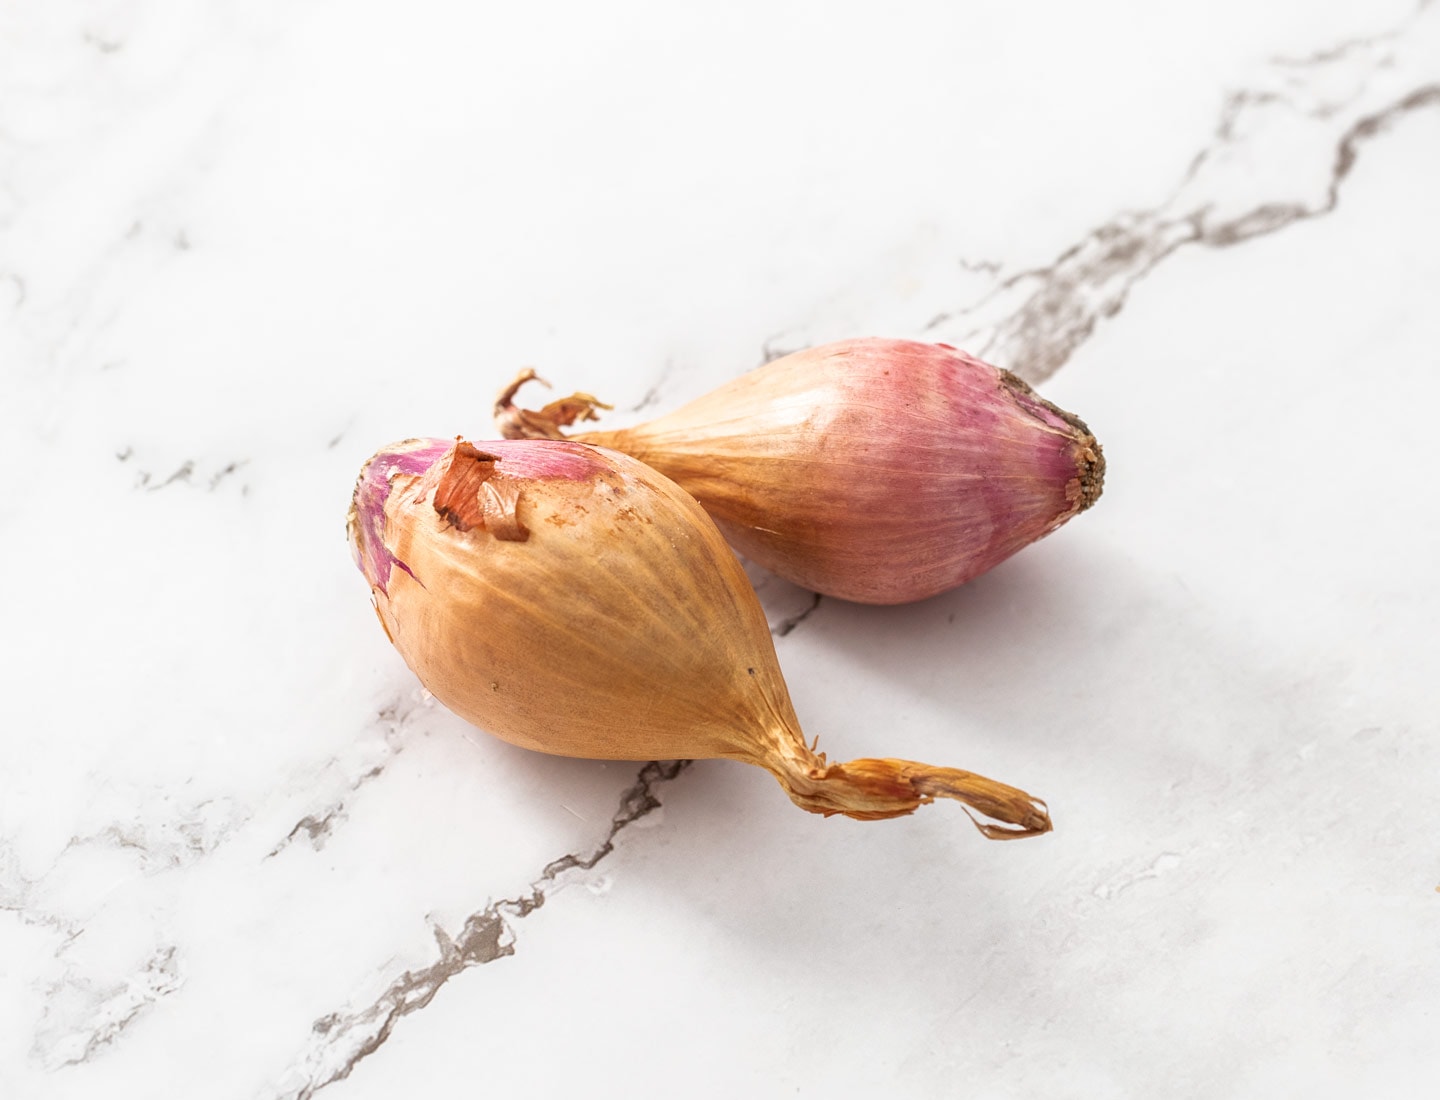 2 shallots on a marble surface.